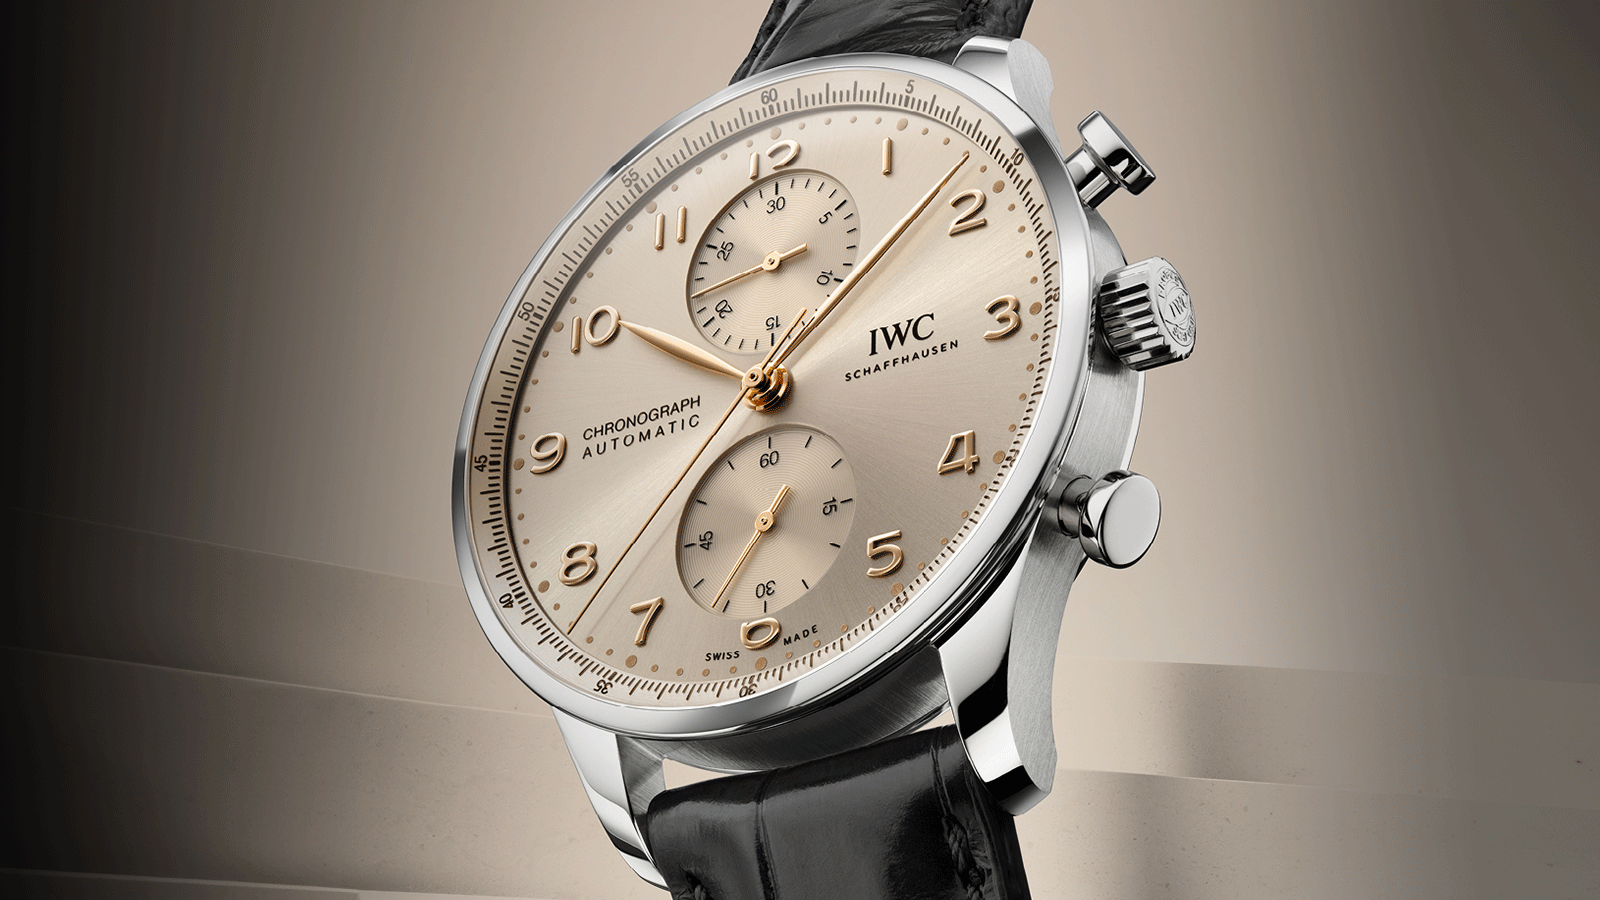 IWC Schaffhausen launches three new versions of the Portugieser Chronograph at Watches and Wonders Geneva. The new dial colours, Horizon Blue, Obsidian and Dune capture the unique atmospheres of different times of day and night.